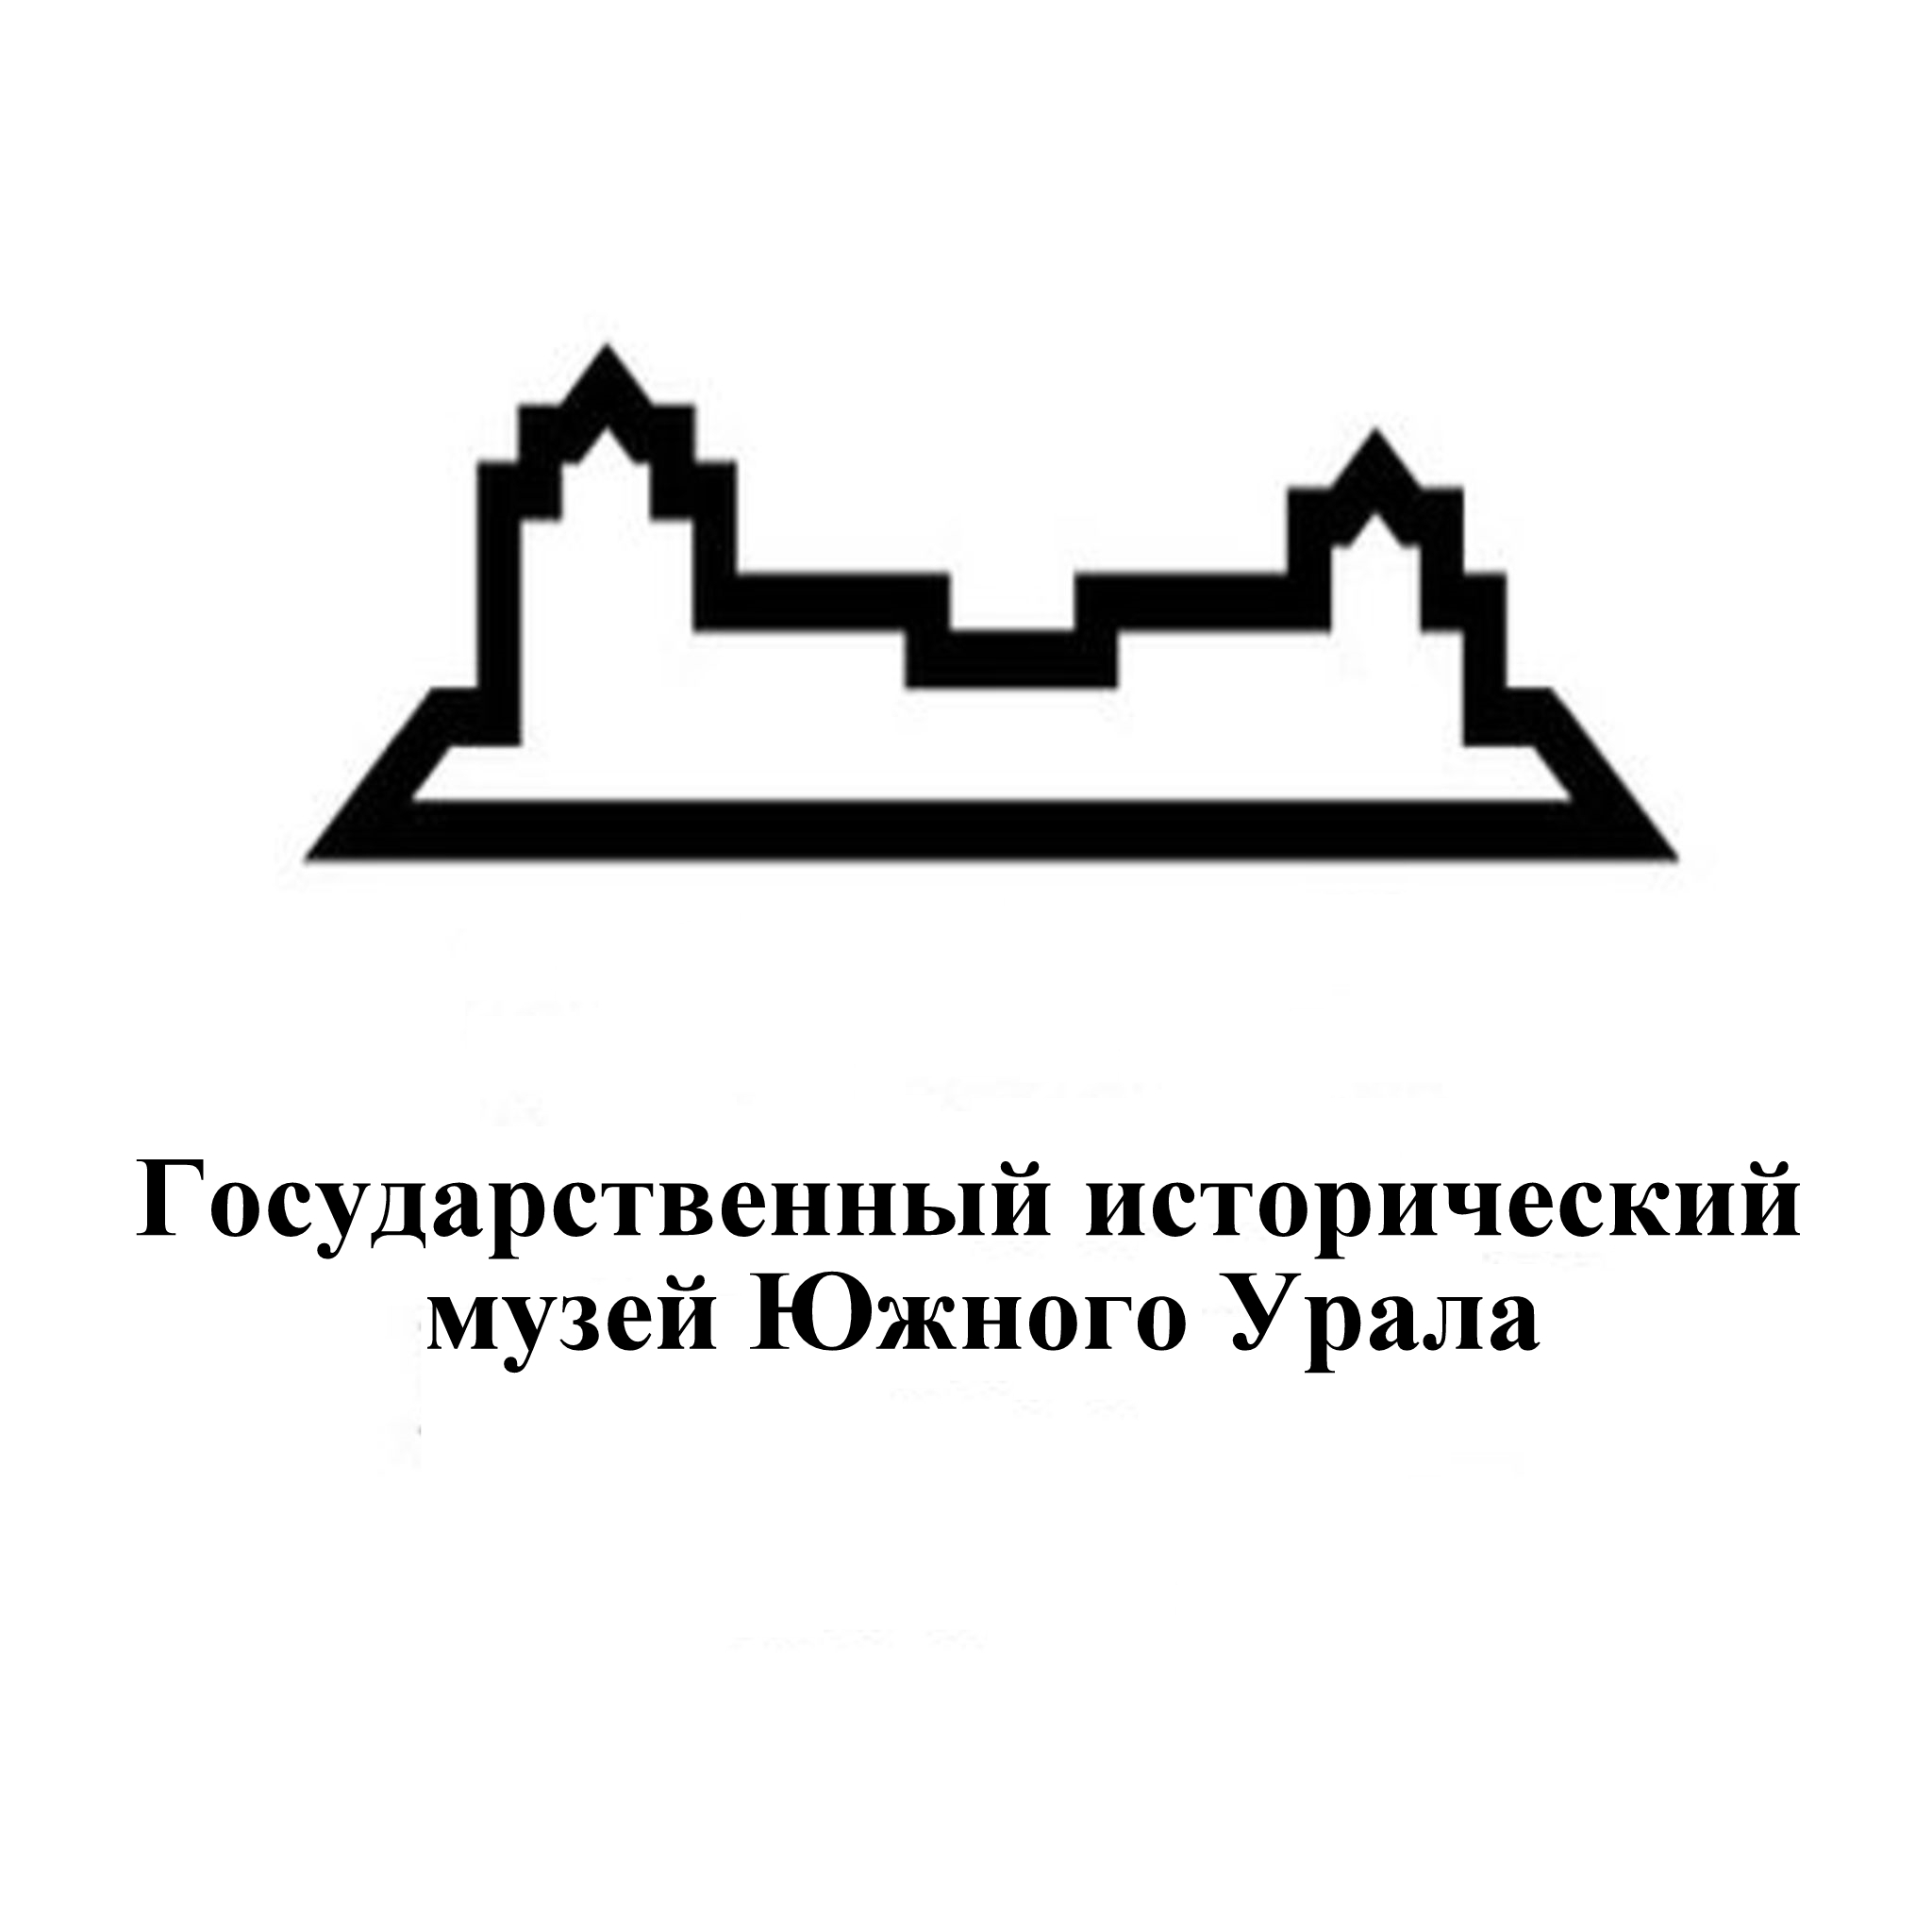 State historical Museum of Southern Ural